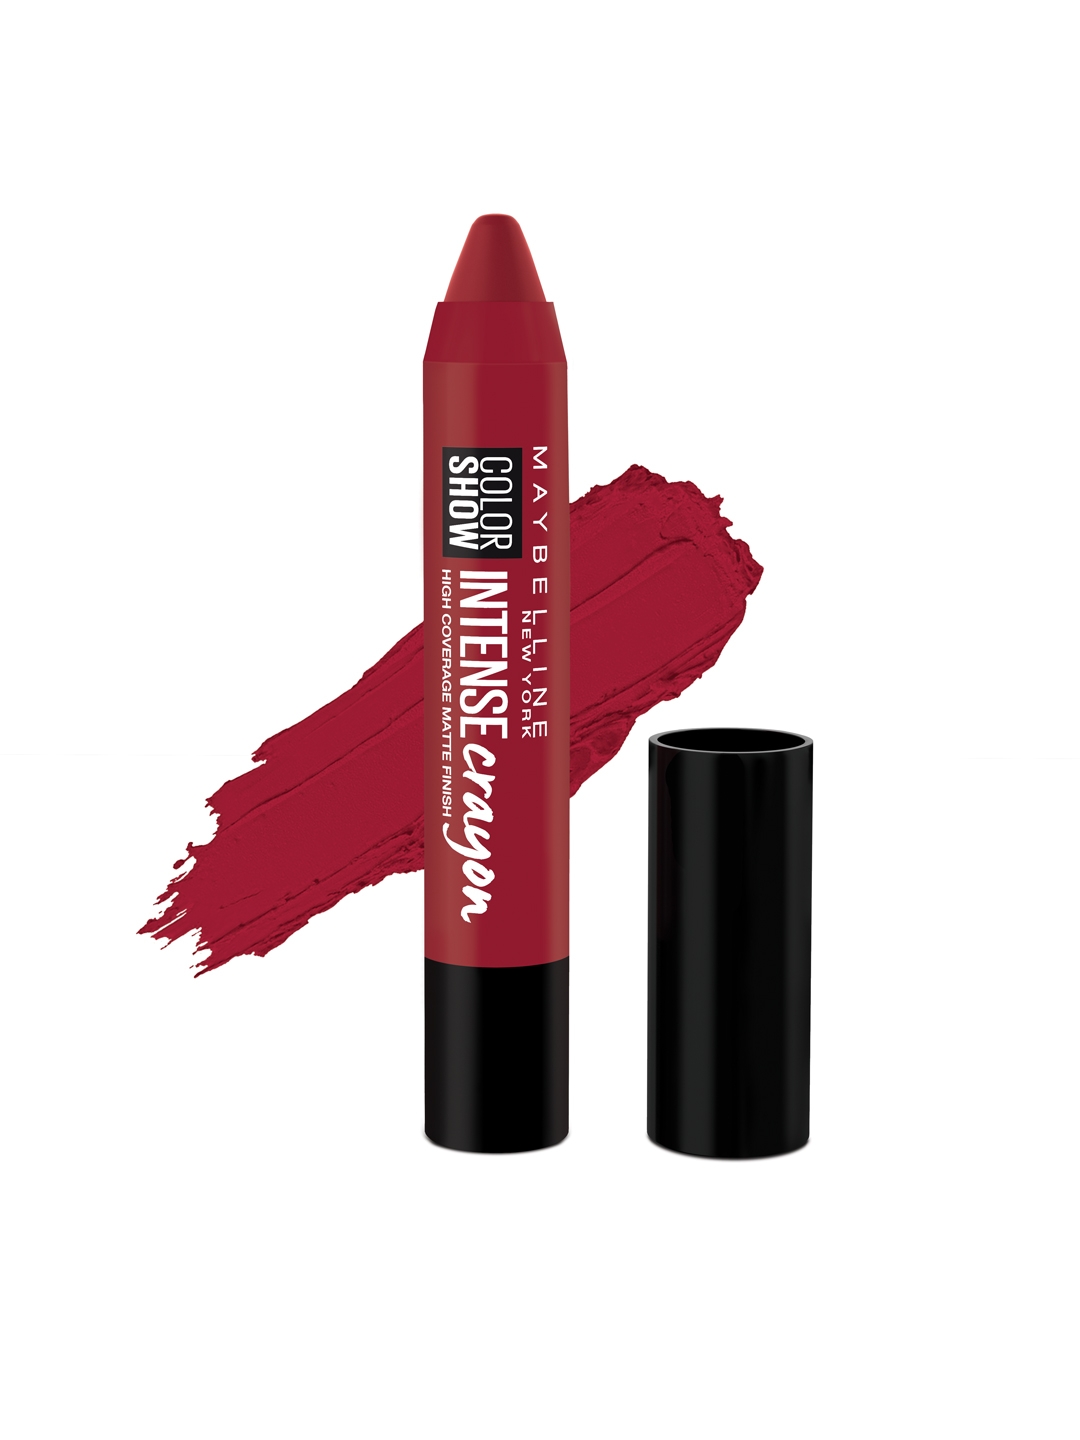 Maybelline Color Show Intense Crayon Lipstick   Intense Red